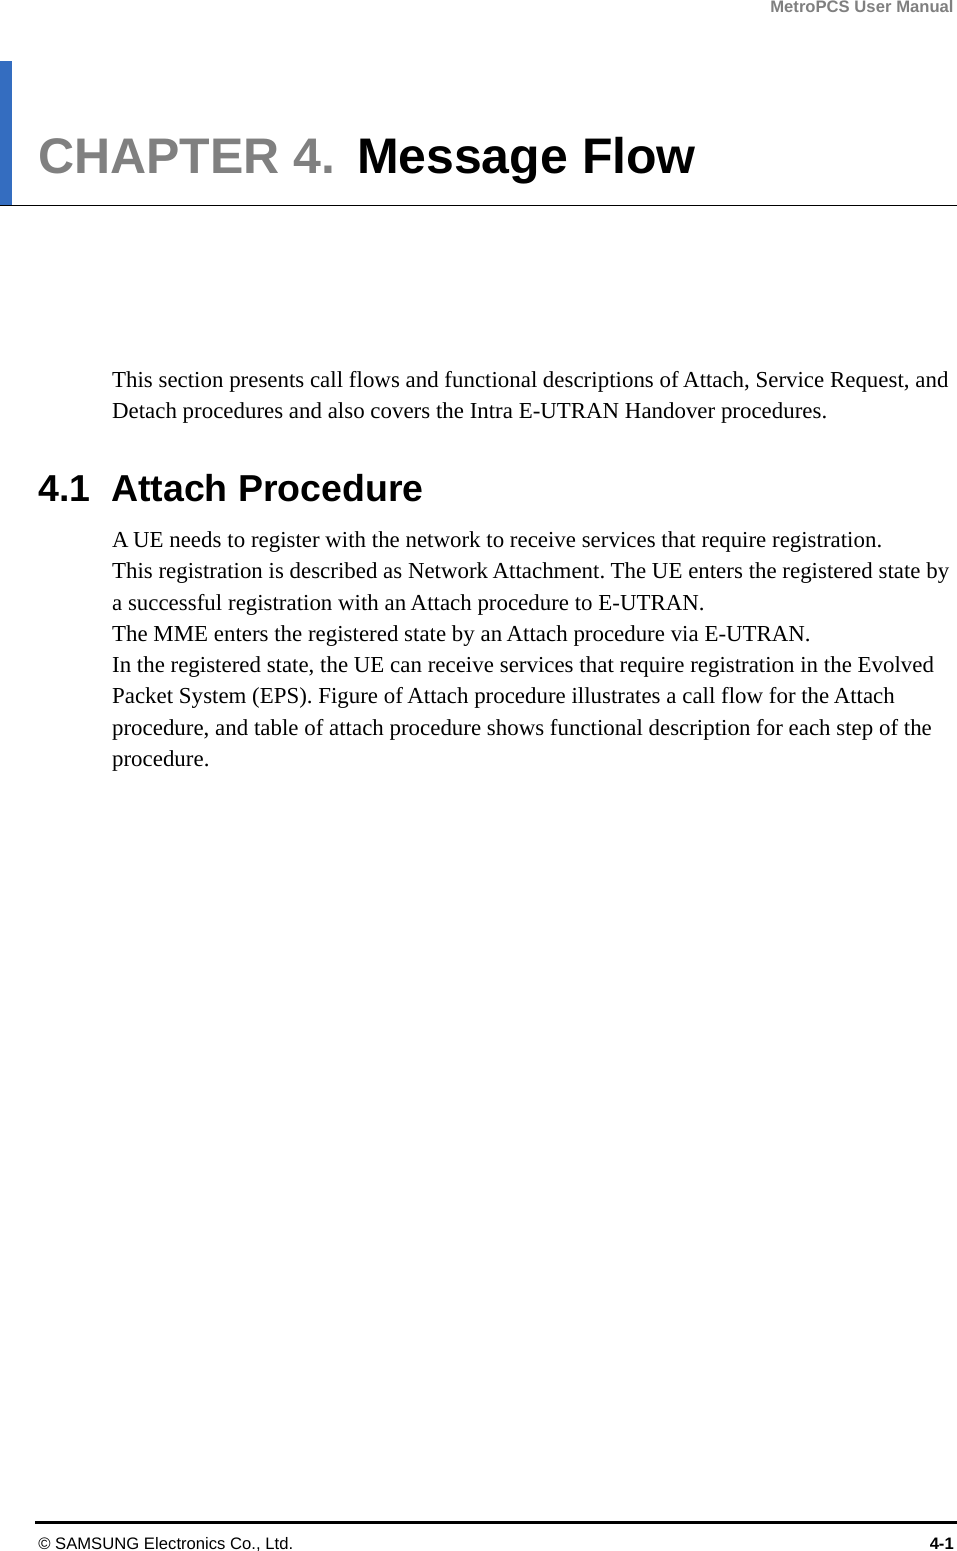 MetroPCS User Manual © SAMSUNG Electronics Co., Ltd.  4-1 CHAPTER 4.  Message Flow      This section presents call flows and functional descriptions of Attach, Service Request, and Detach procedures and also covers the Intra E-UTRAN Handover procedures.  4.1 Attach Procedure A UE needs to register with the network to receive services that require registration. This registration is described as Network Attachment. The UE enters the registered state by a successful registration with an Attach procedure to E-UTRAN. The MME enters the registered state by an Attach procedure via E-UTRAN. In the registered state, the UE can receive services that require registration in the Evolved Packet System (EPS). Figure of Attach procedure illustrates a call flow for the Attach procedure, and table of attach procedure shows functional description for each step of the procedure. 